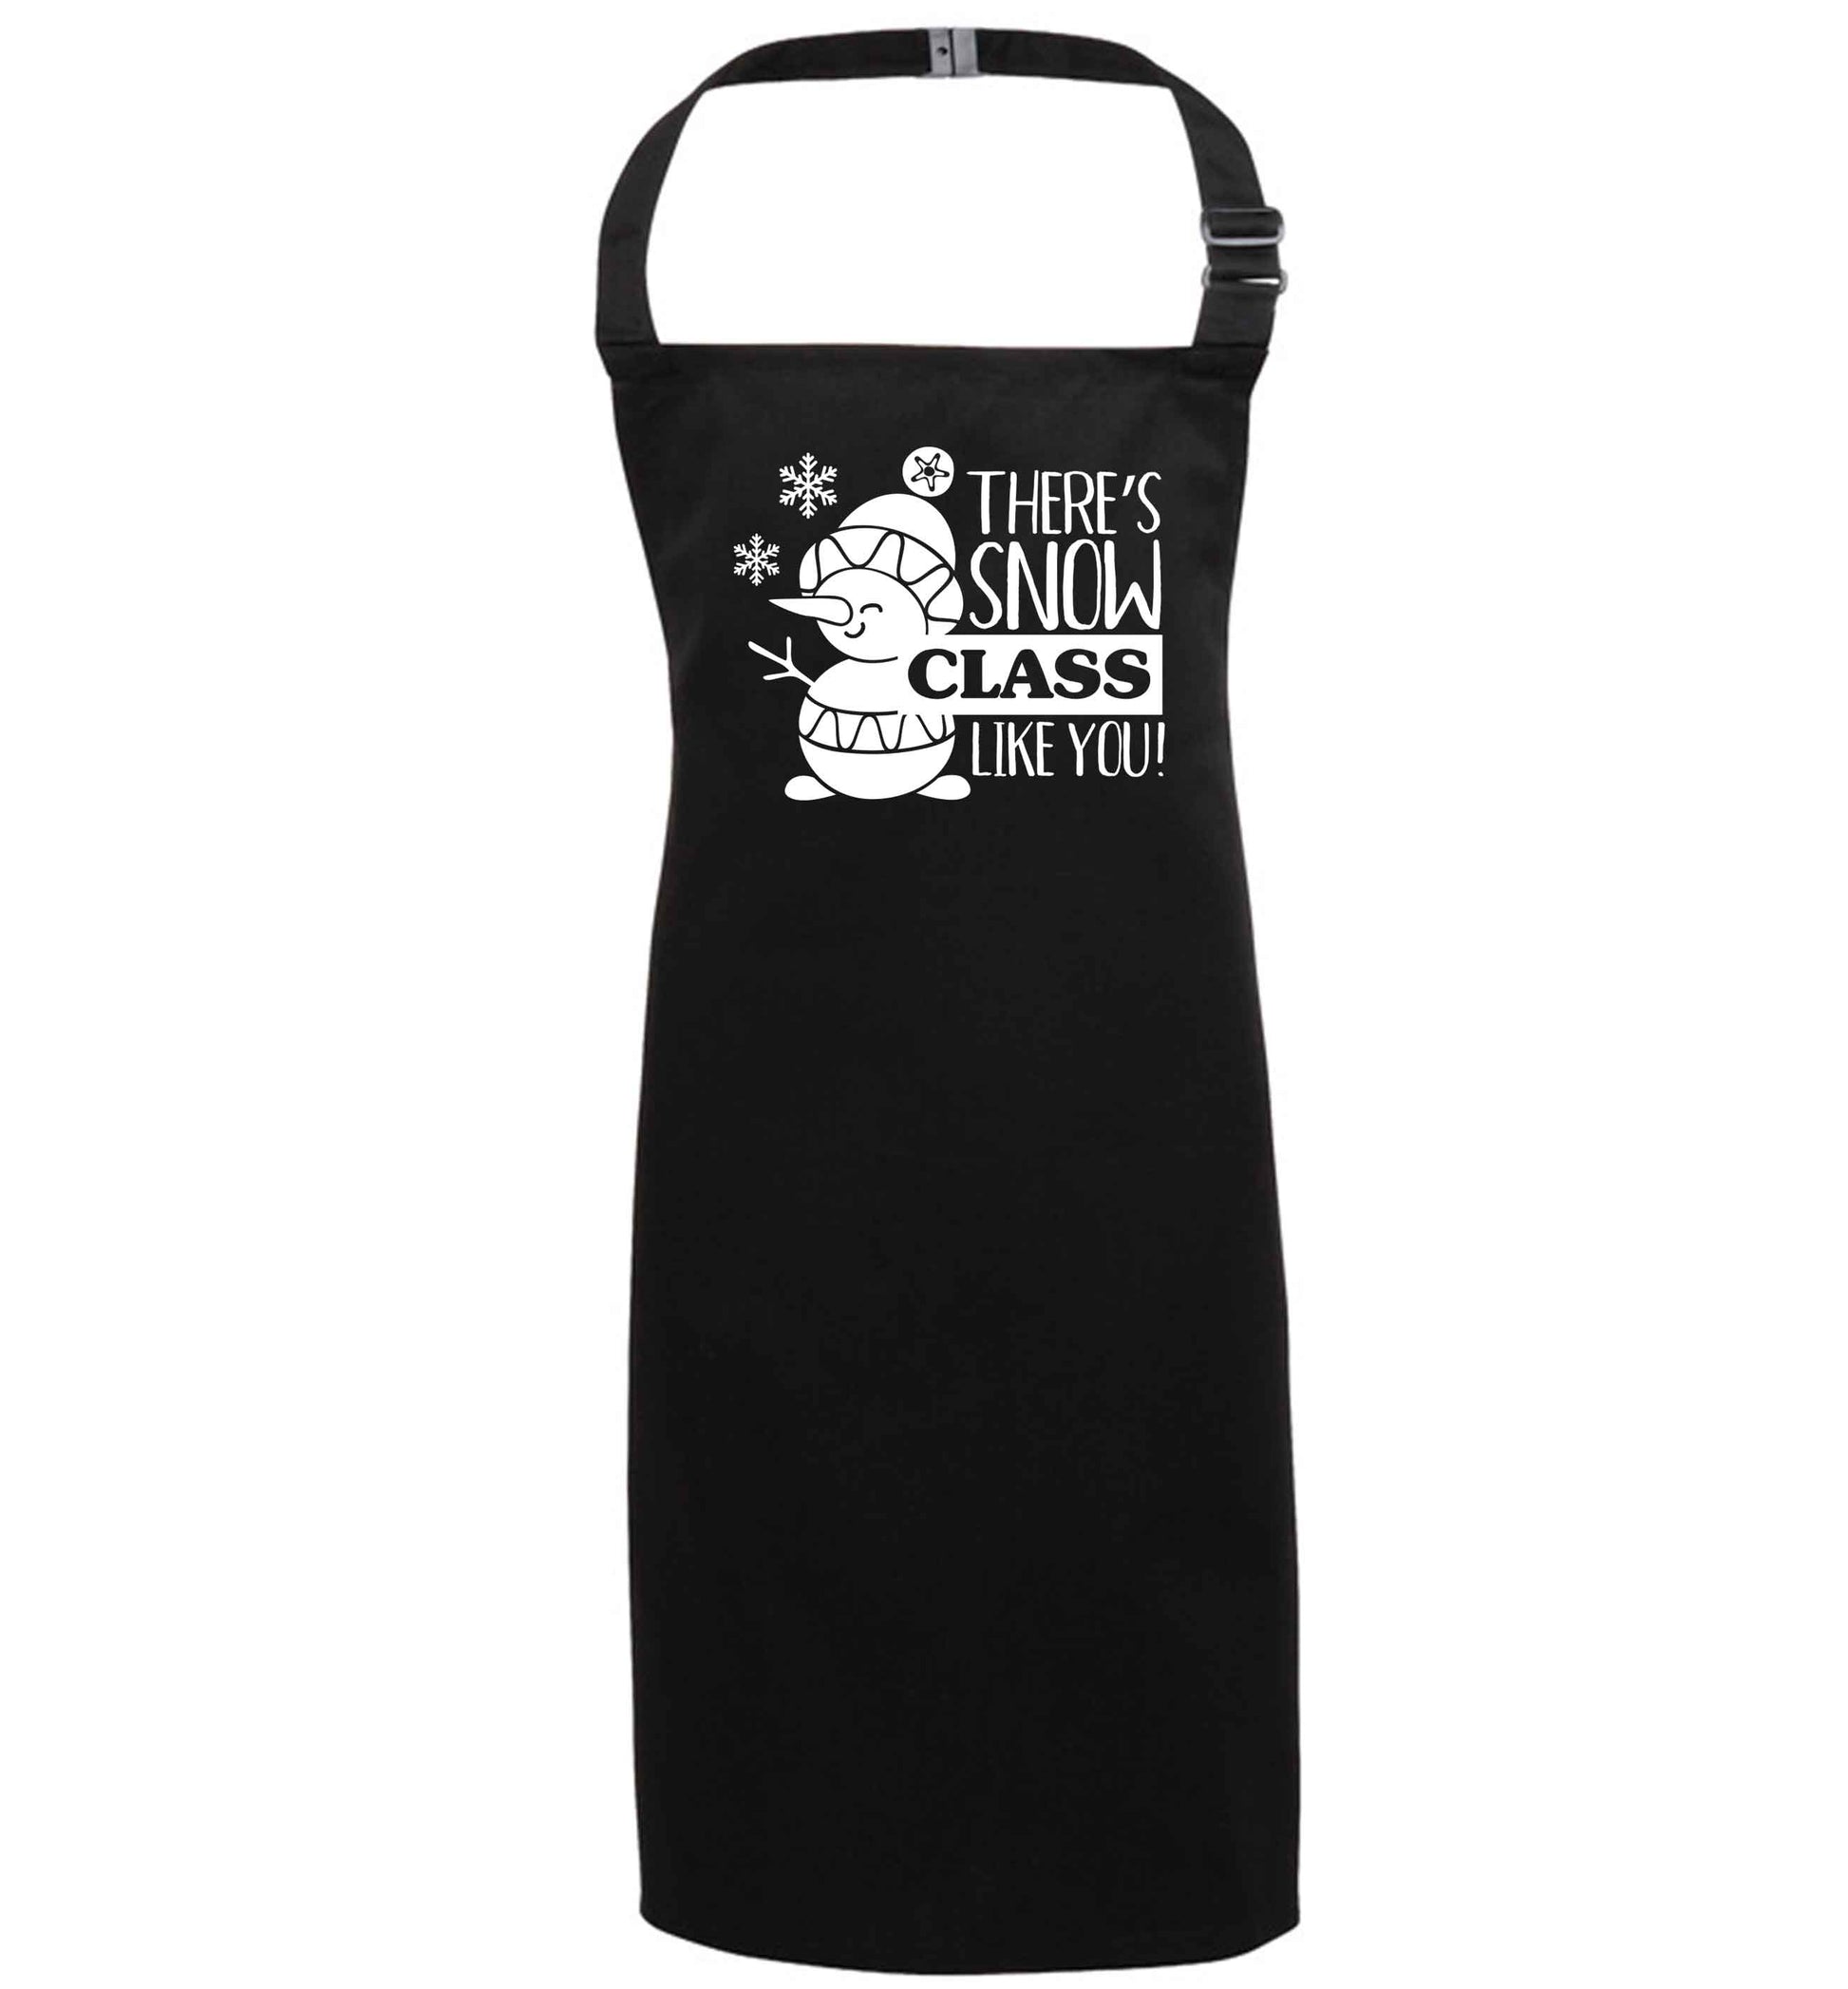 There's snow class like you black apron 7-10 years